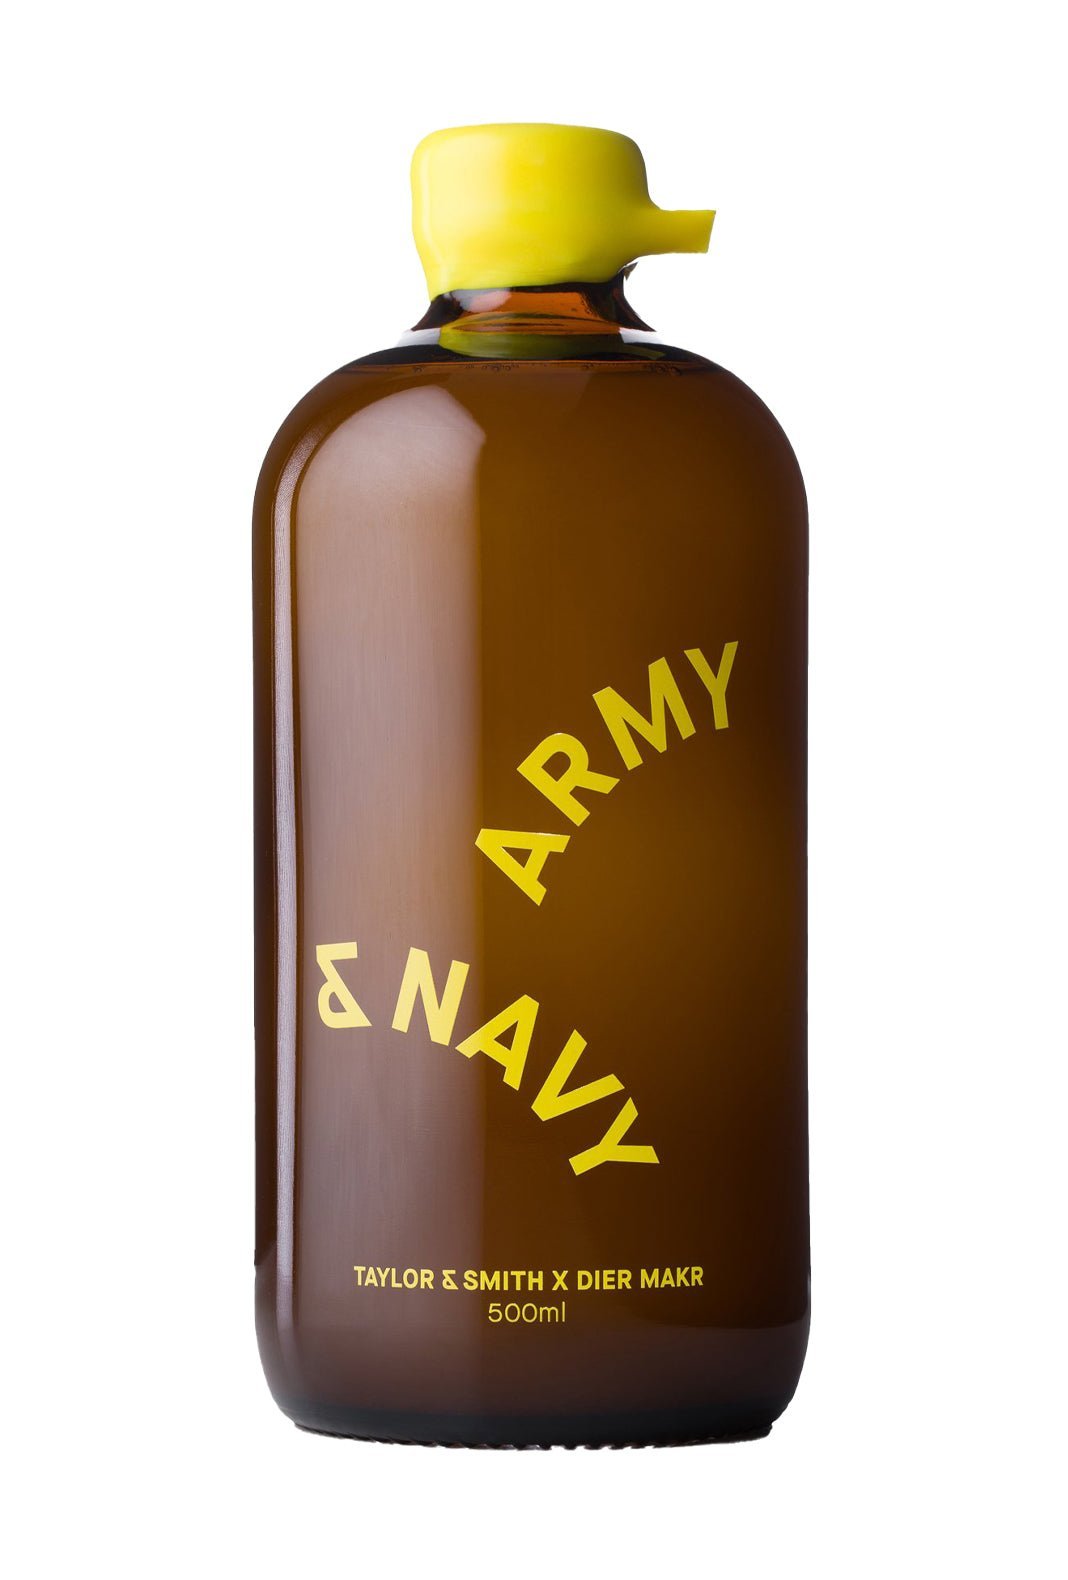 Taylor & Smith Army and Navy Cocktail 23% 500ml | cocktail | Shop online at Spirits of France